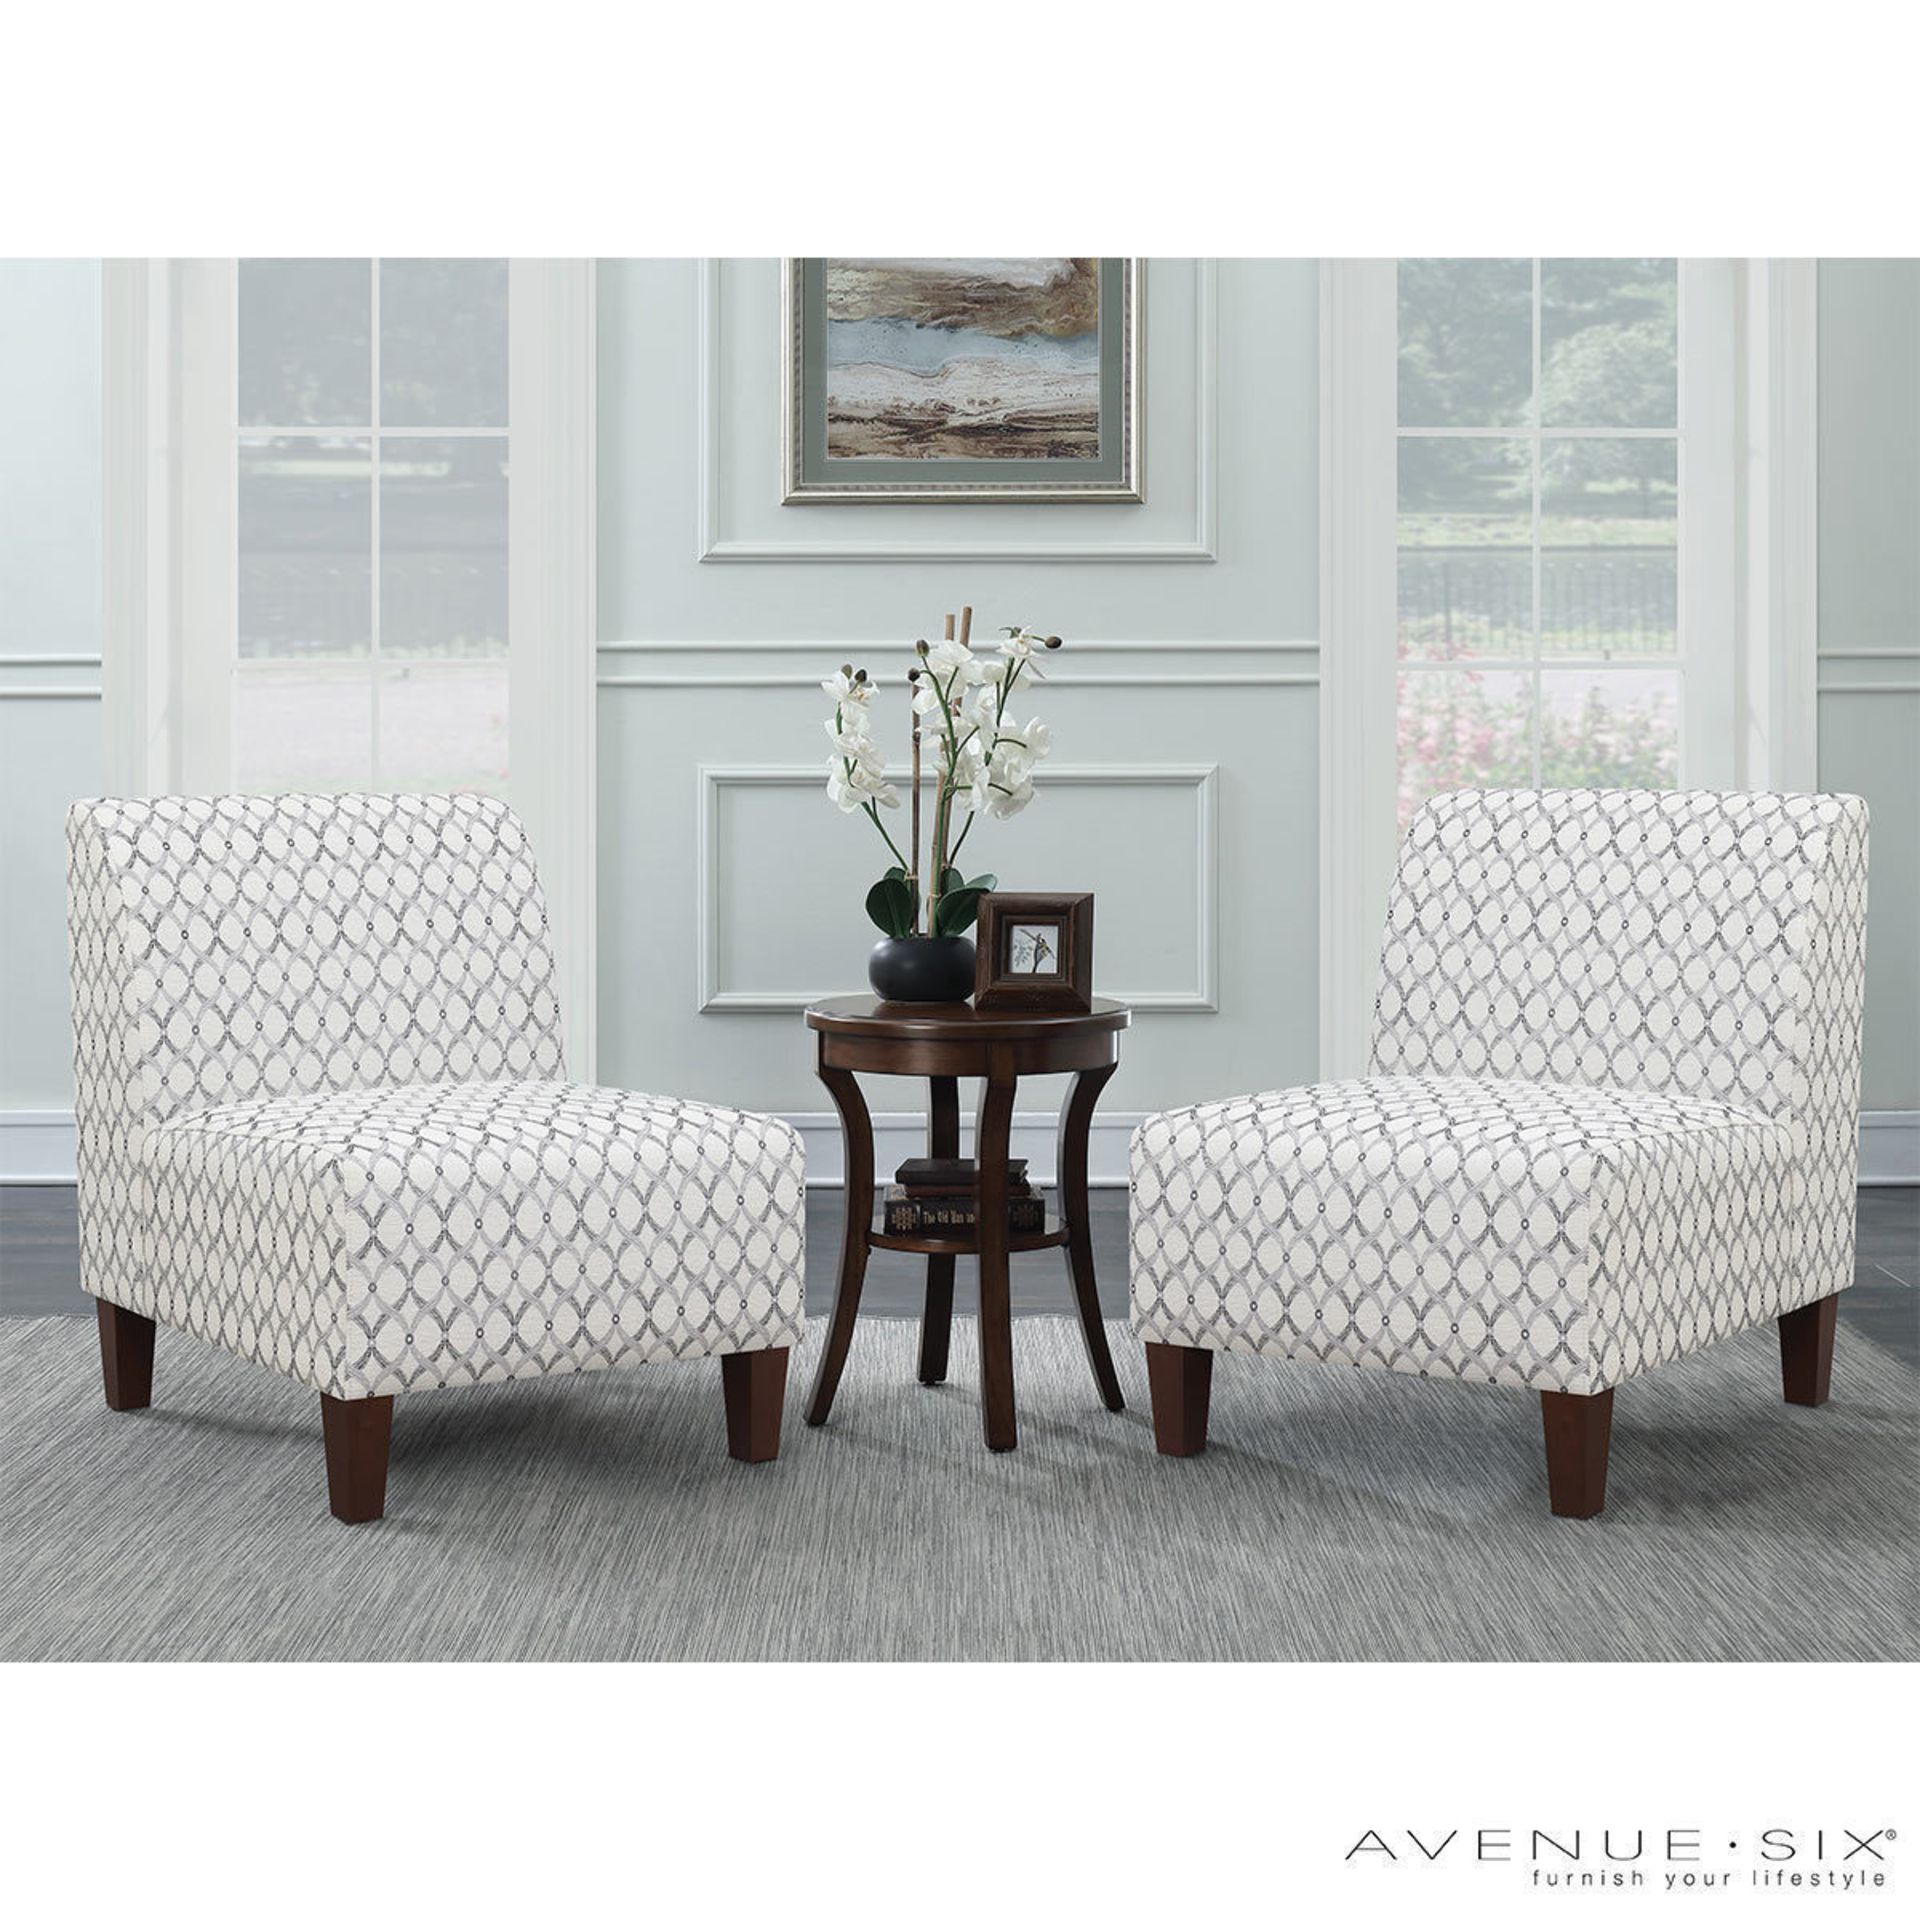 1 AVENUE SIX 3 PIECE FABRIC CHAIR AND ACCENT TABLE SET RRP Â£299 (EXCELLENT CONDITION)